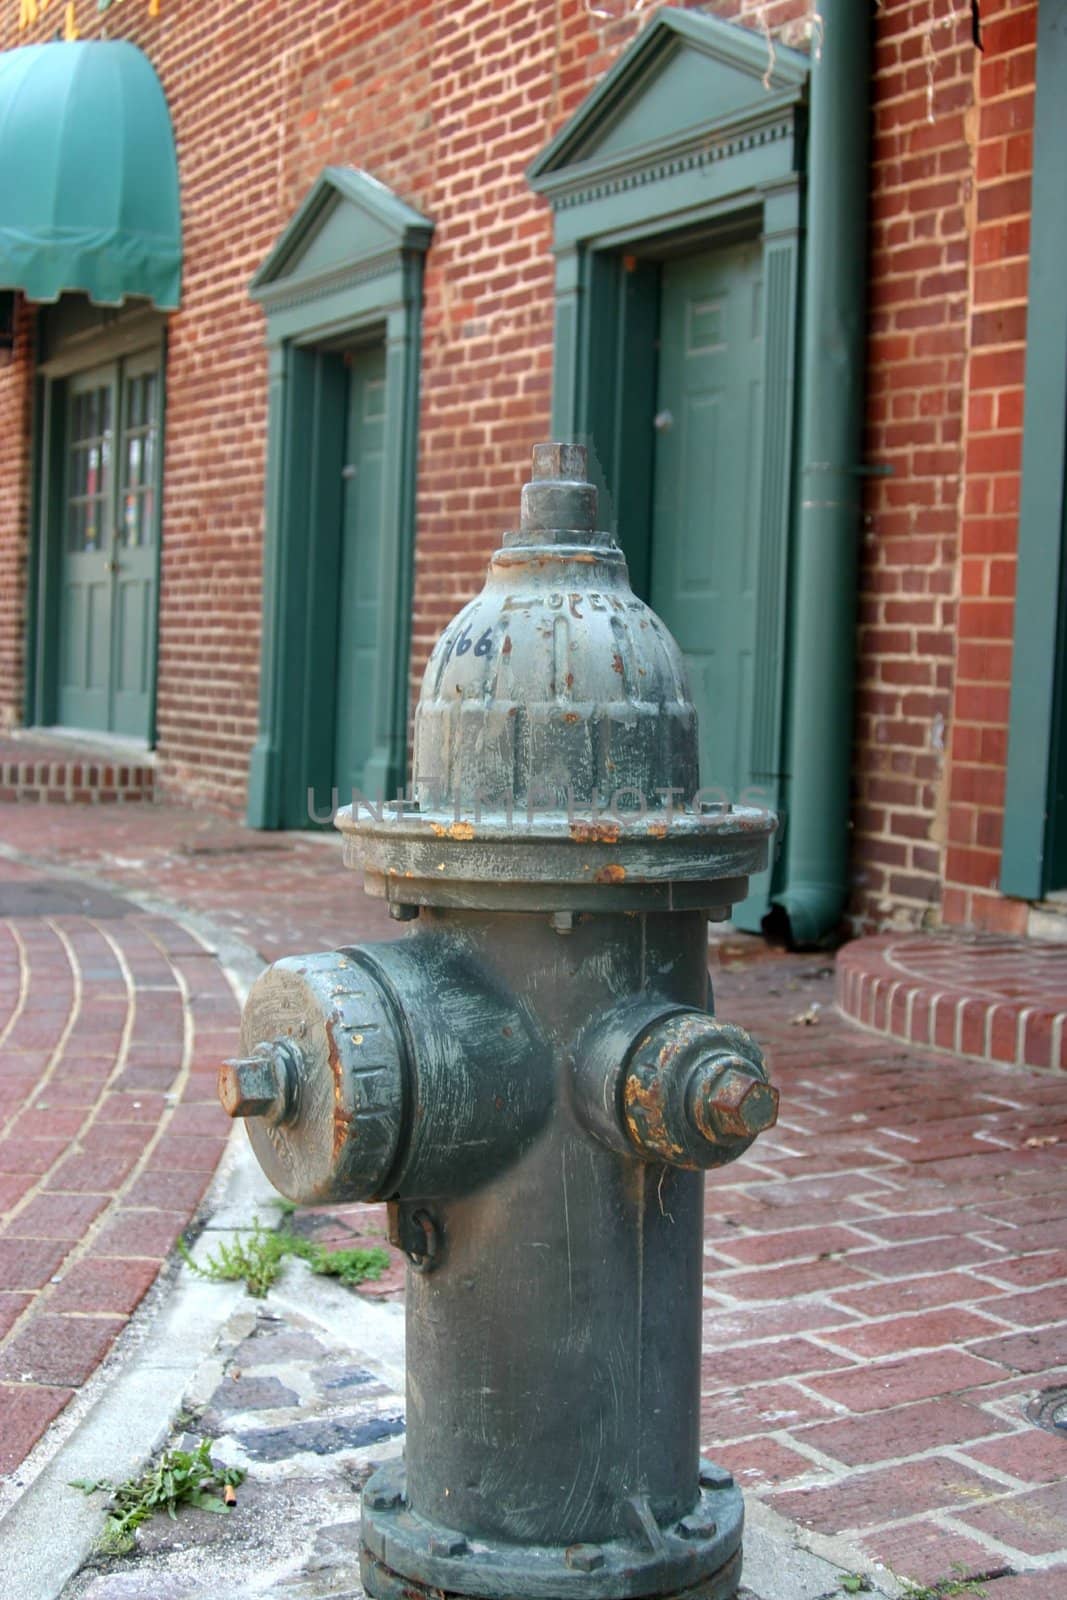 This is a green fire hydrant in an old commercial district on a brick paved street. 